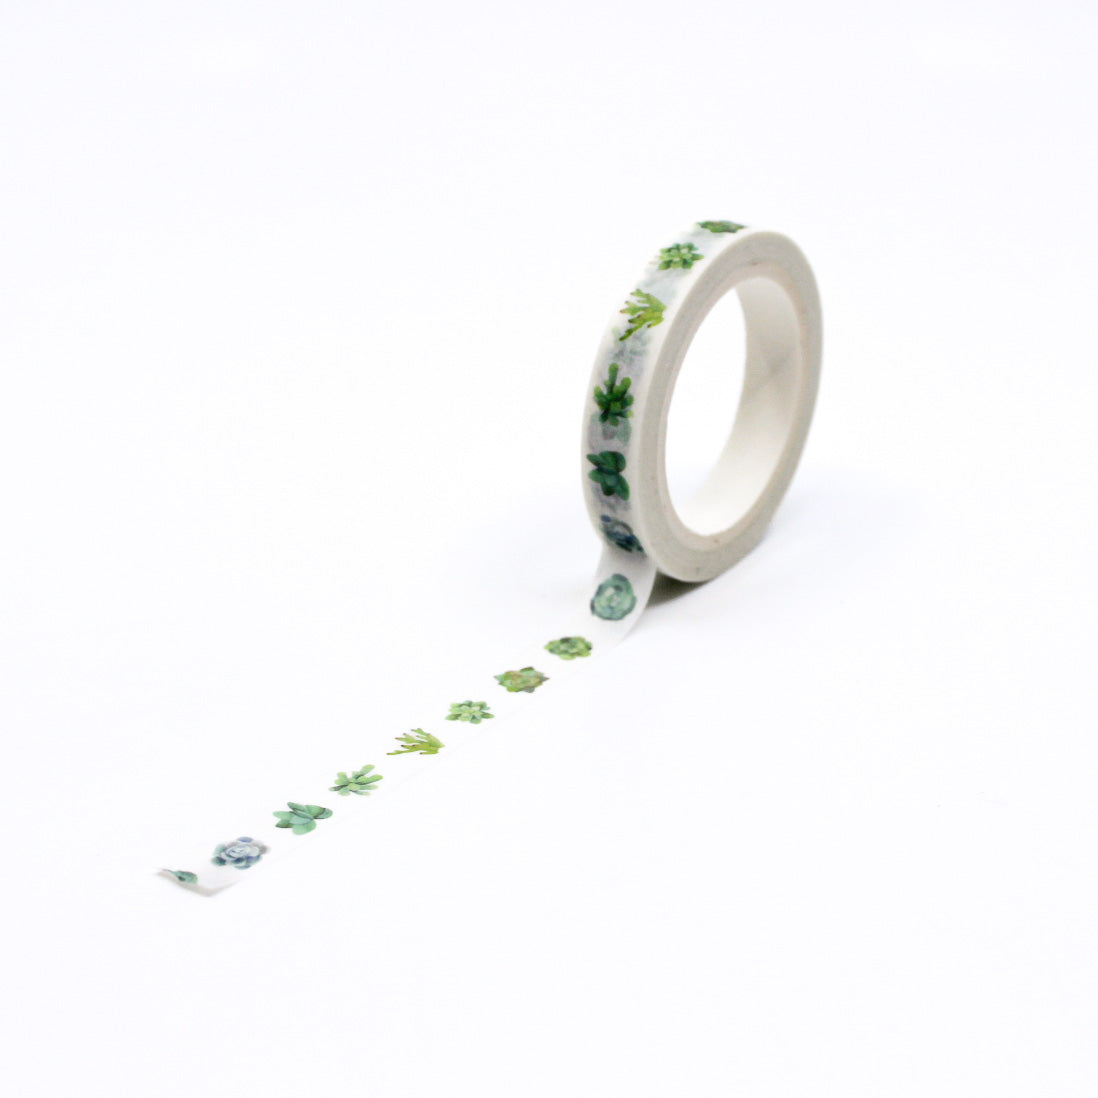 Bring a touch of nature to your projects with our Narrow Succulent Plants Washi Tape, featuring delicate and detailed succulent illustrations. Ideal for adding a touch of botanical charm to your crafts. This tape is sold at BBB Supplies Craft Shop.